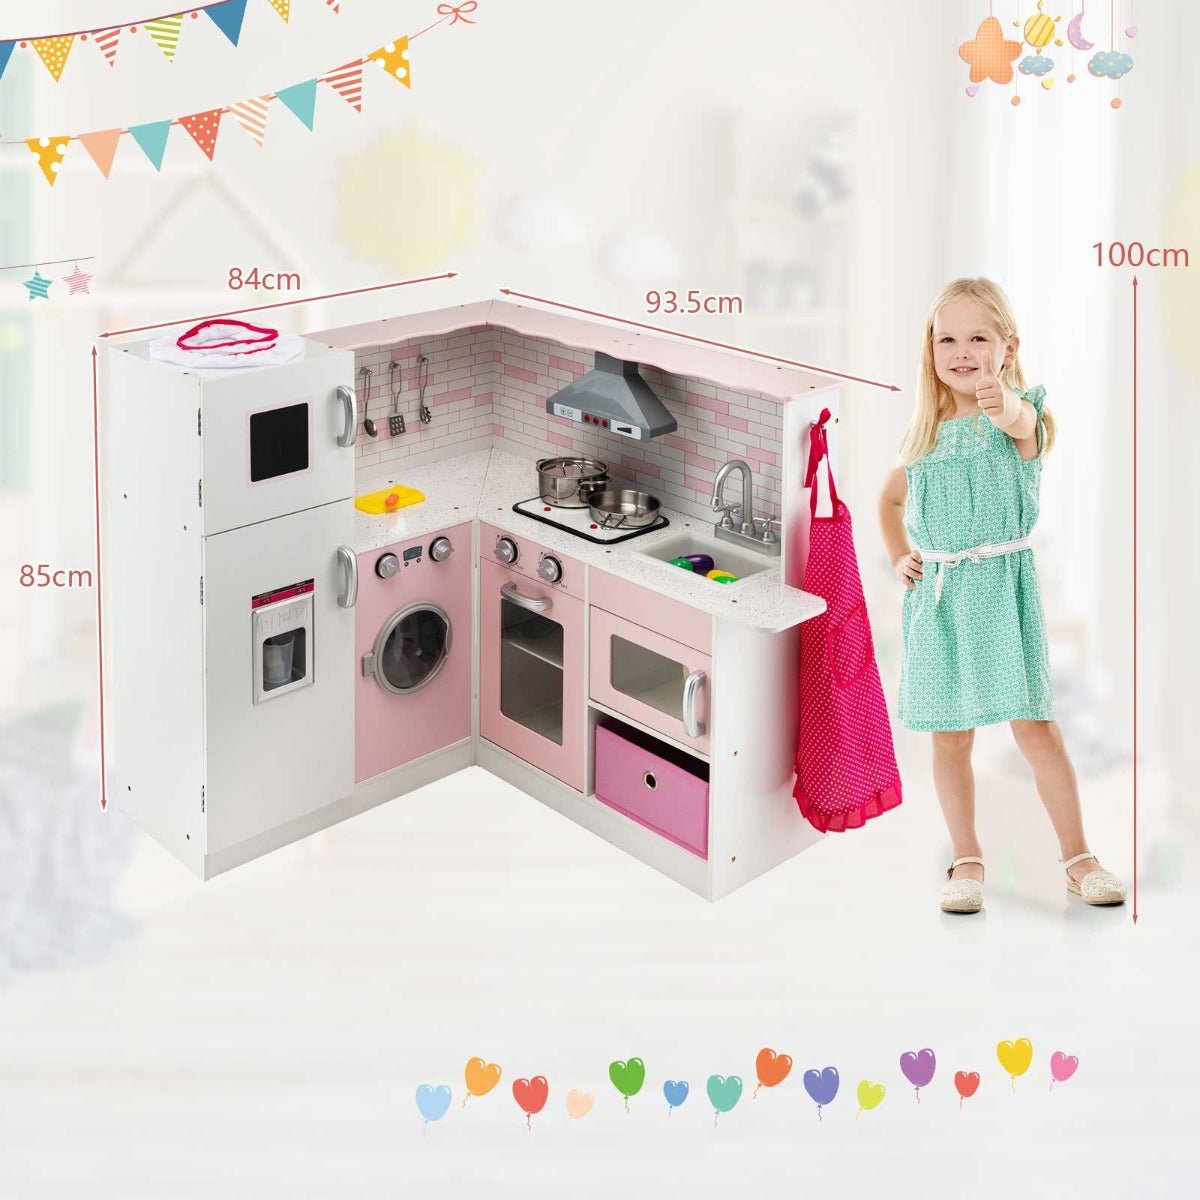 Creative Culinary Play: Kids Kitchen Pretend Play Set with Cookware & Apron